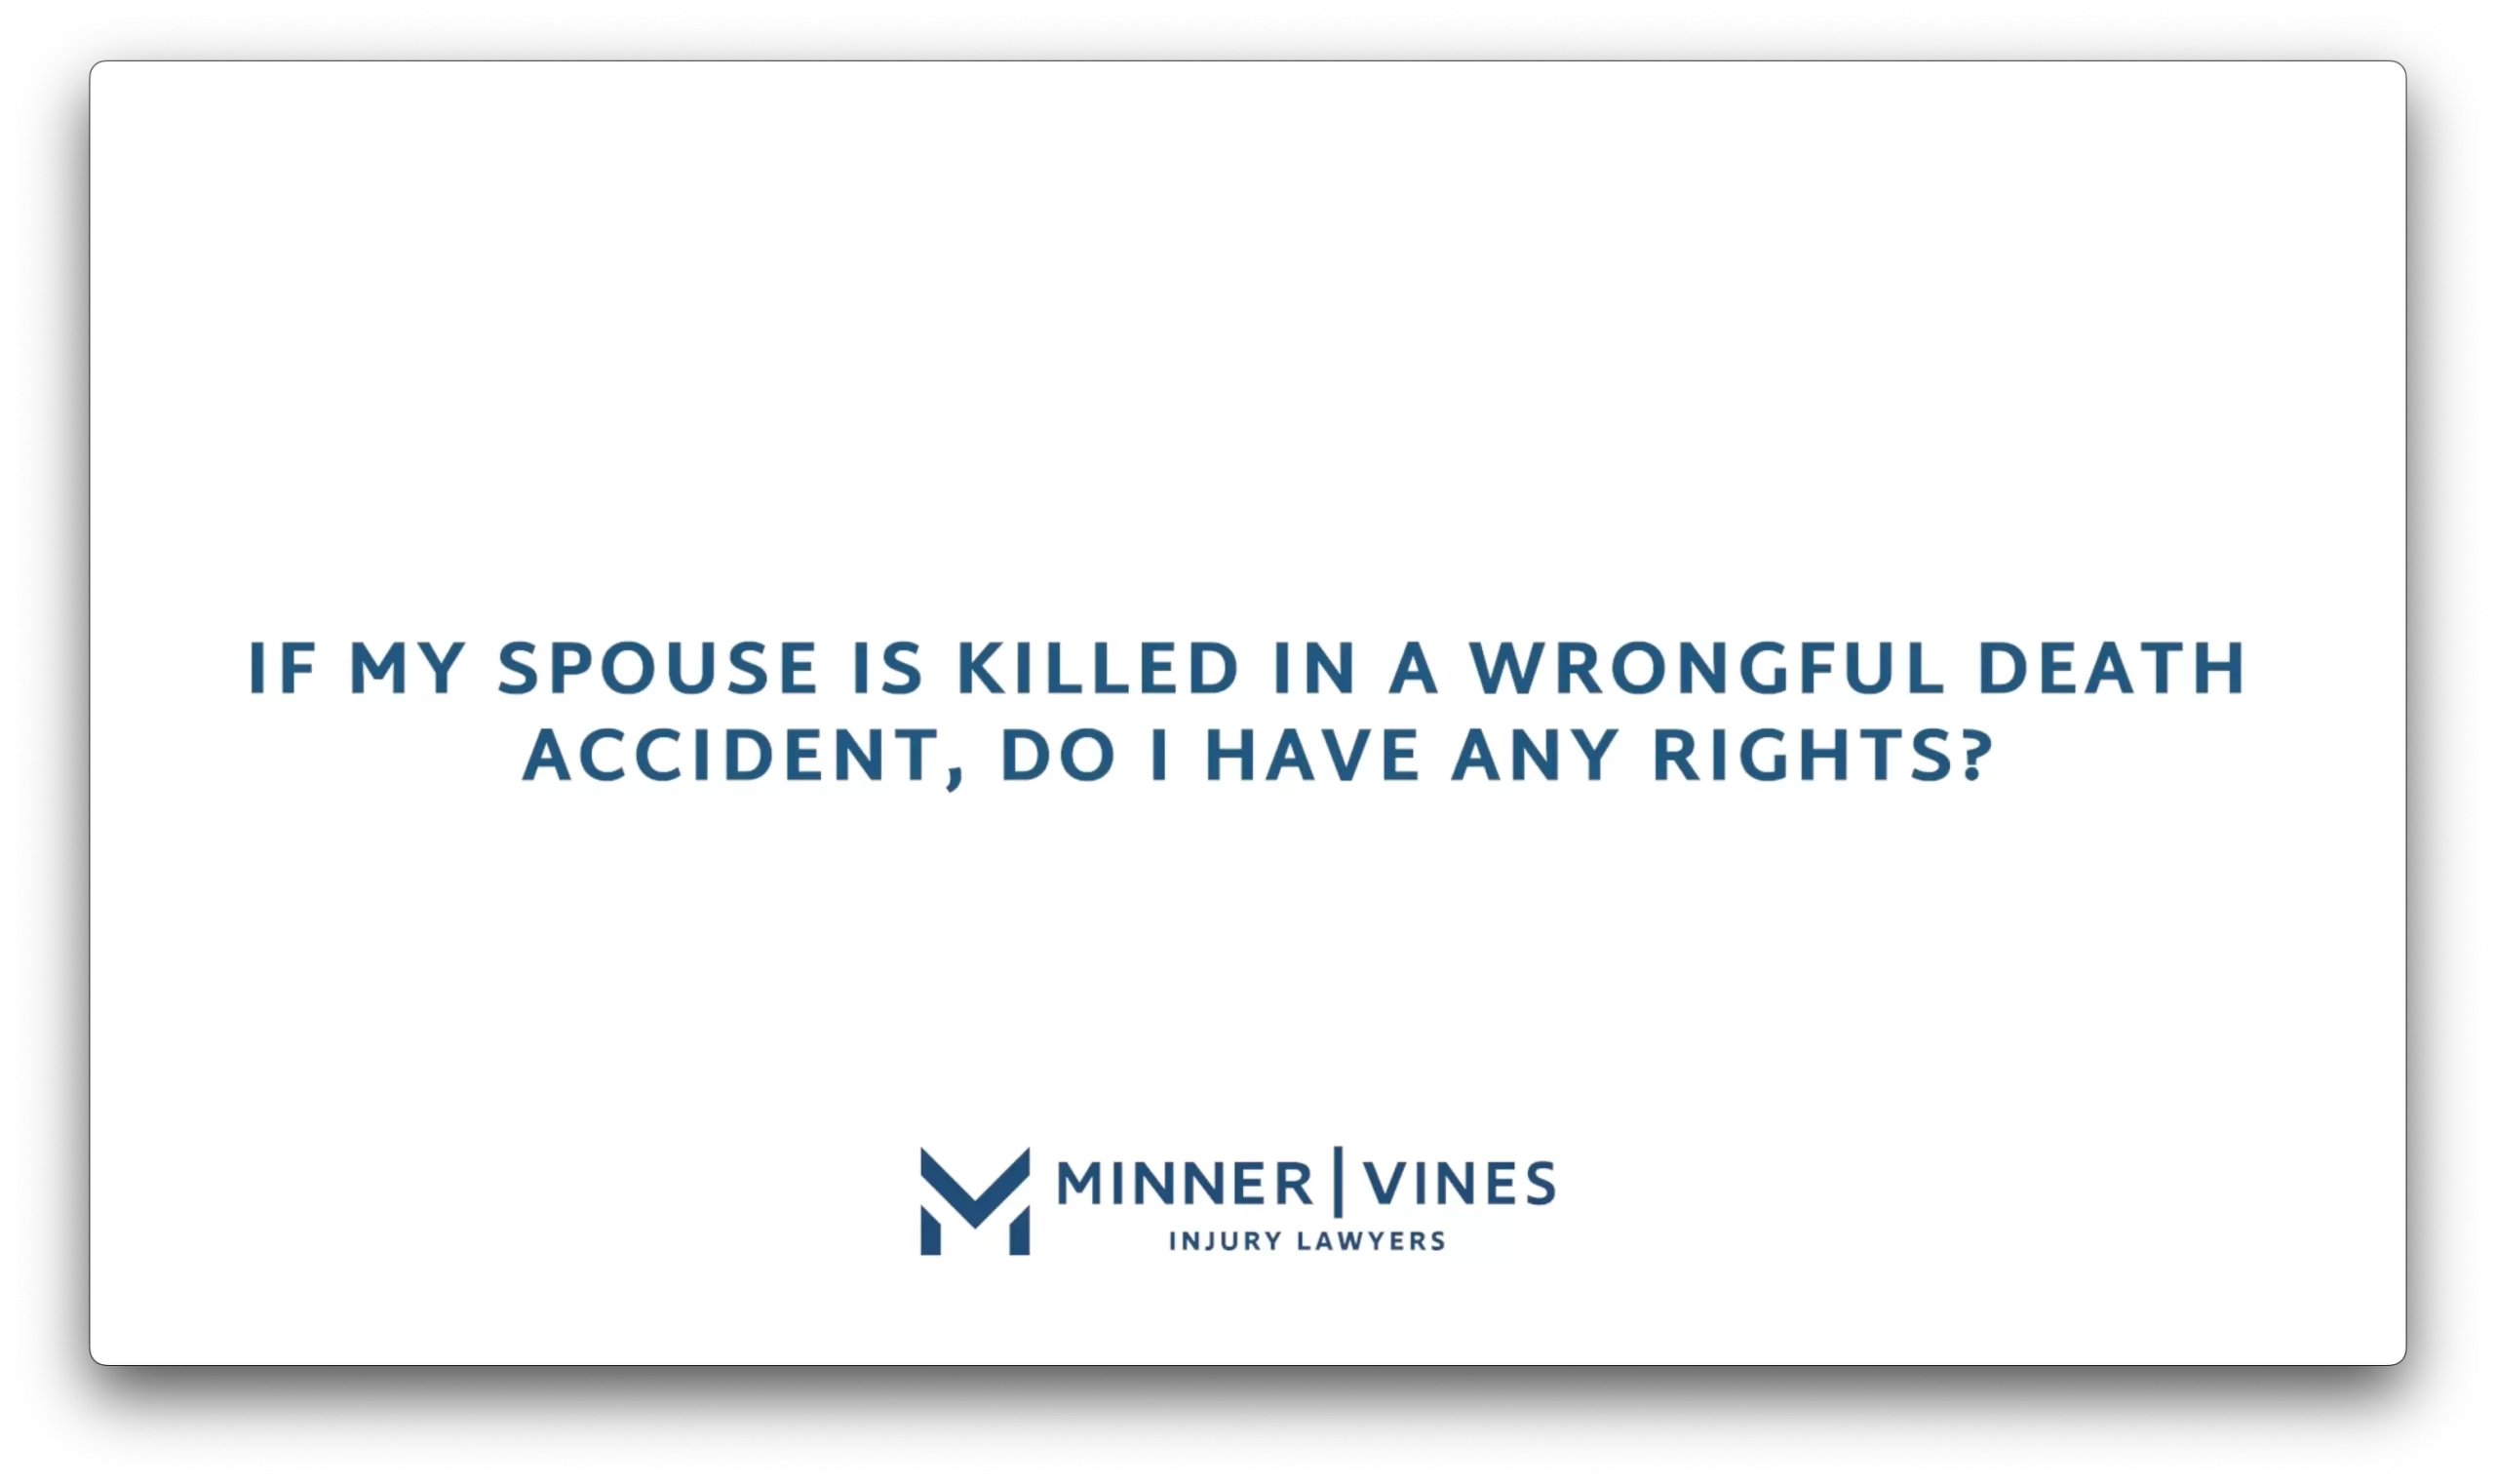 If my spouse is killed in a wrongful death accident, do I have any rights?